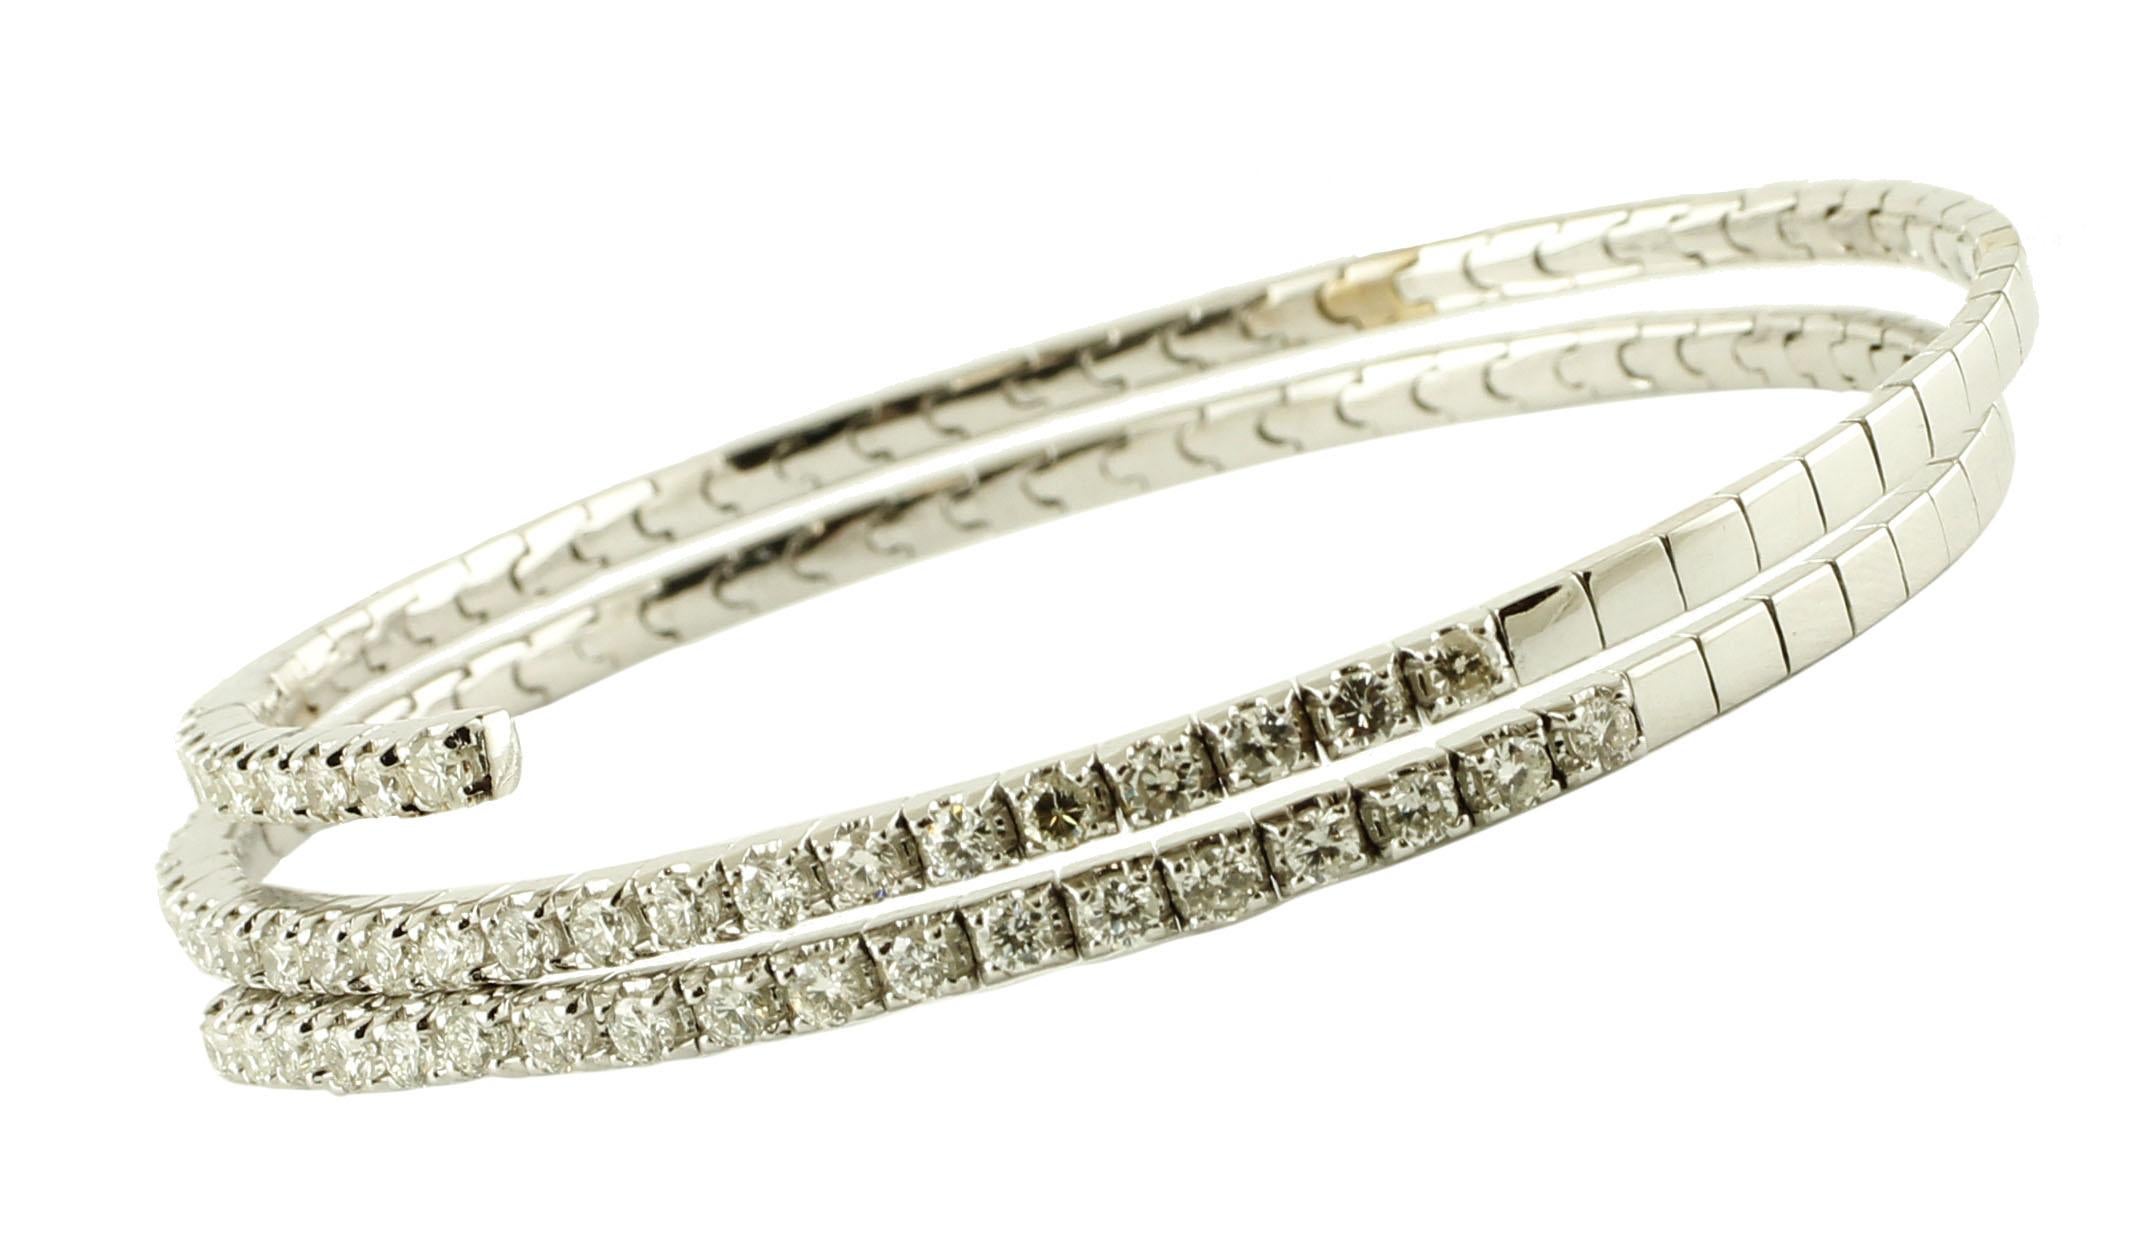 Elegant and fine 18k white gold bracelet mounted with 2.77ct of 60 beautiful diamonds, round cut, F color, clarity VS1.
This bracelet is totally handmade by Italian master goldsmiths
Total weight 16.5 g
internal diameter around 6 cm
RF ++ CGUC

For